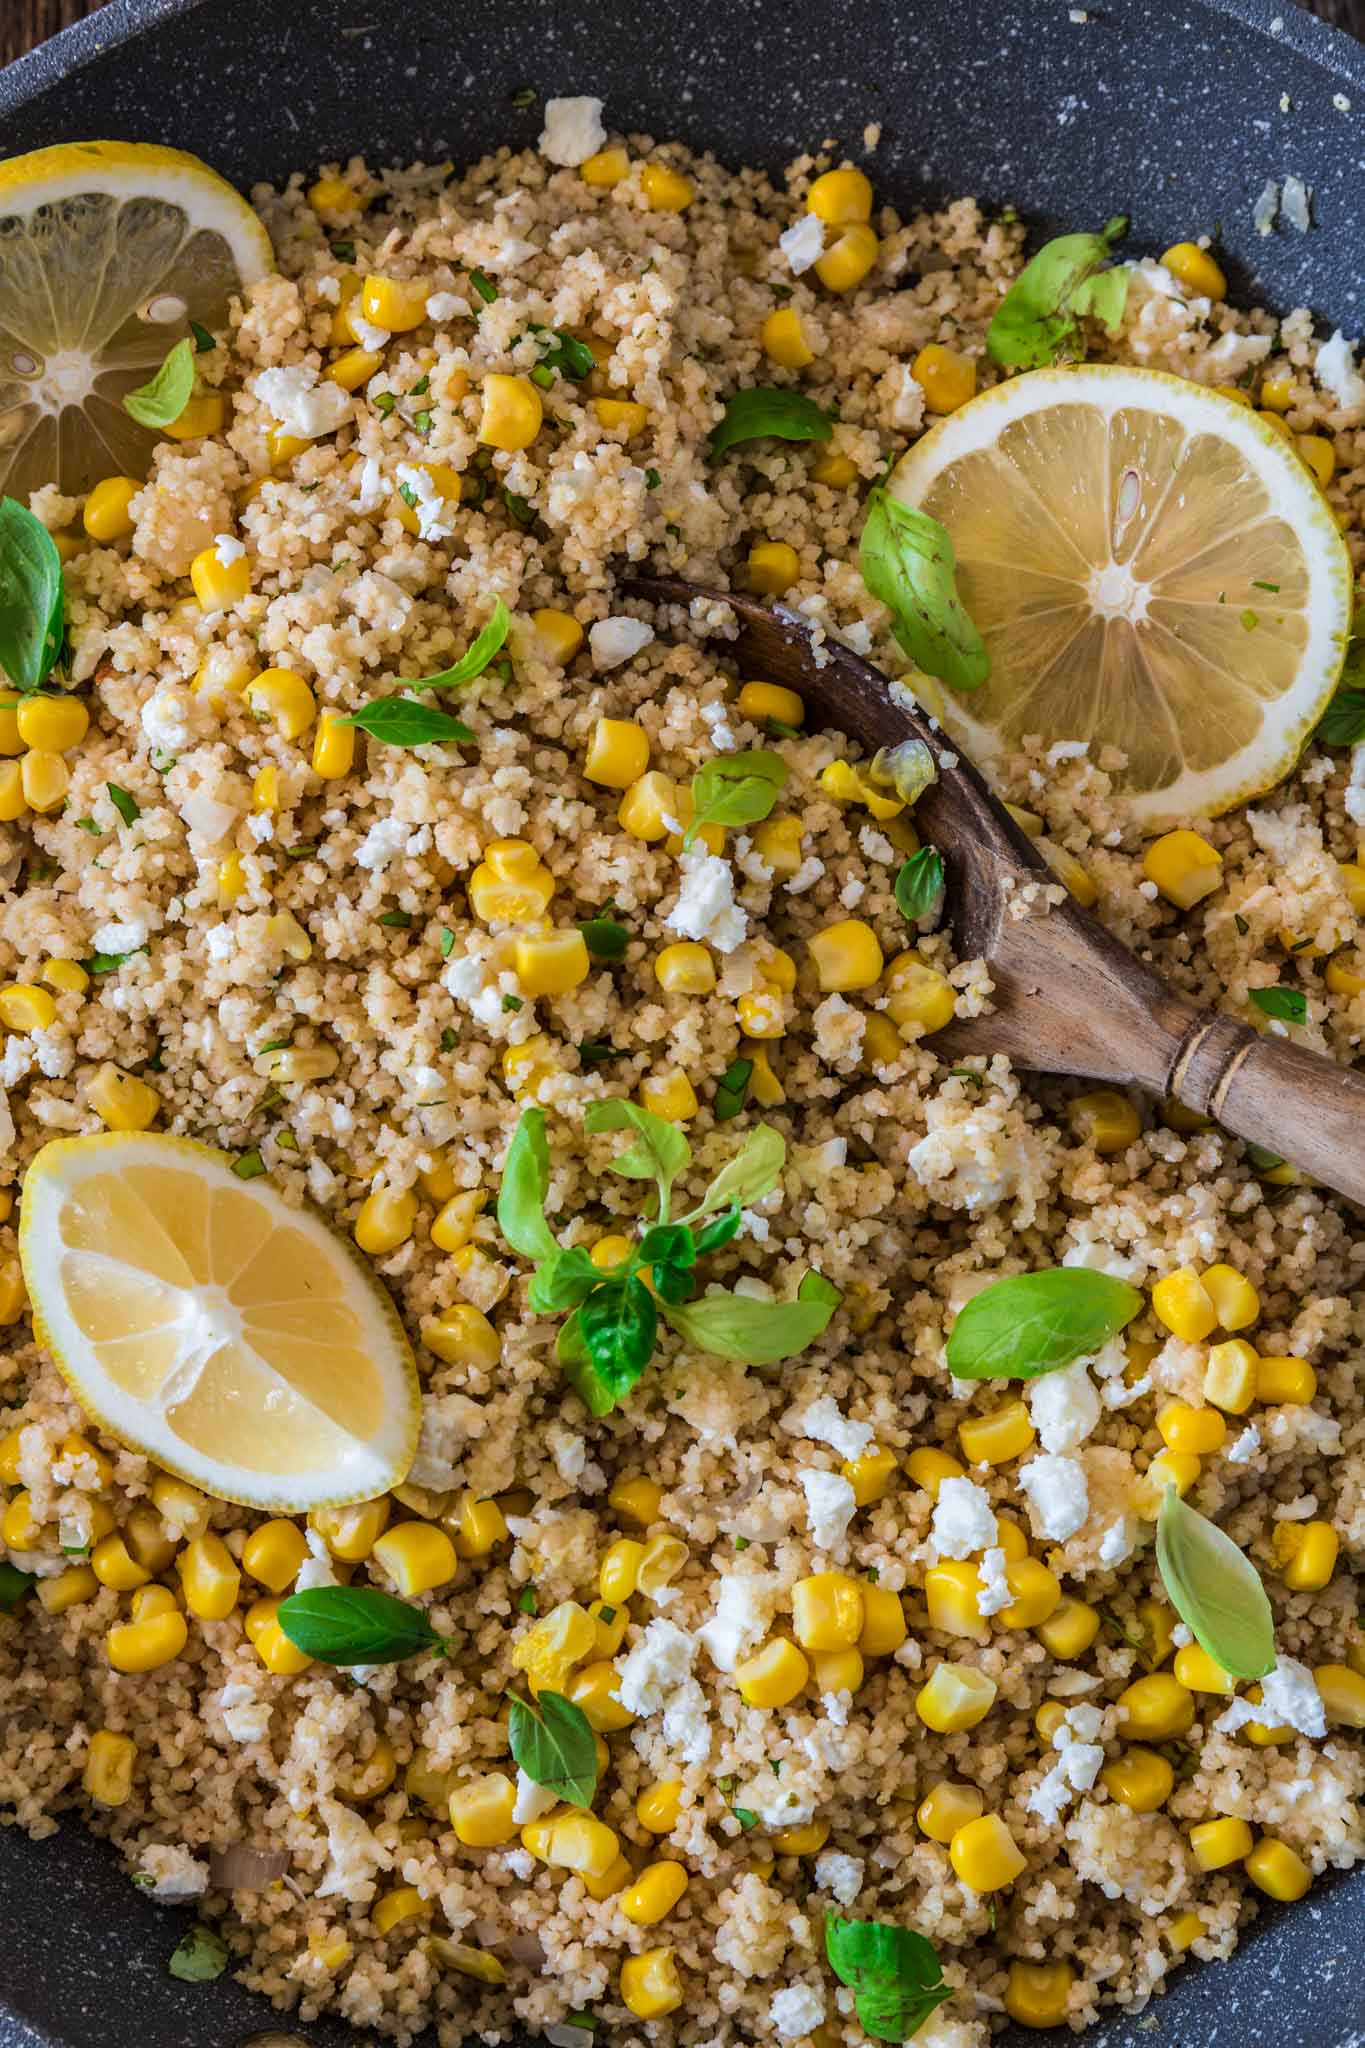 Corn Couscous with Basil, Feta and Lemon | www.oliviascuisine.com | This simple dish, packed with Mediterranean flavors, consists of only 7 main ingredients and is done in about 5 minutes. Serve it warm as a side dish, or cold as a salad. (Recipe and food photography by @oliviascuisine.)